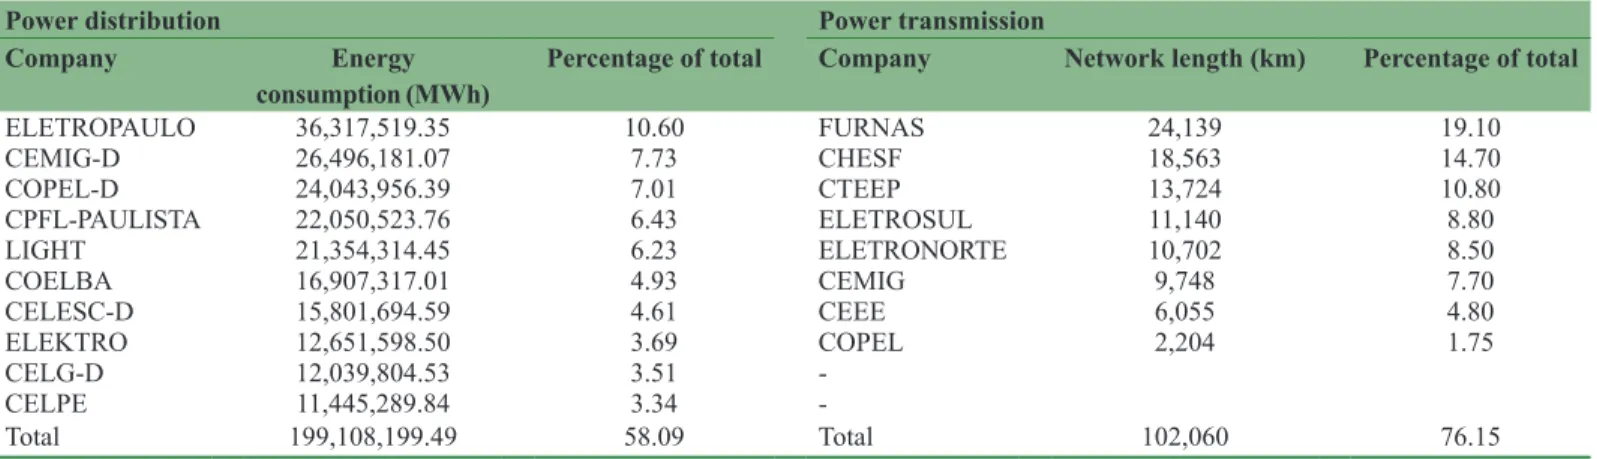 Table 2: Power distribution and transmission companies